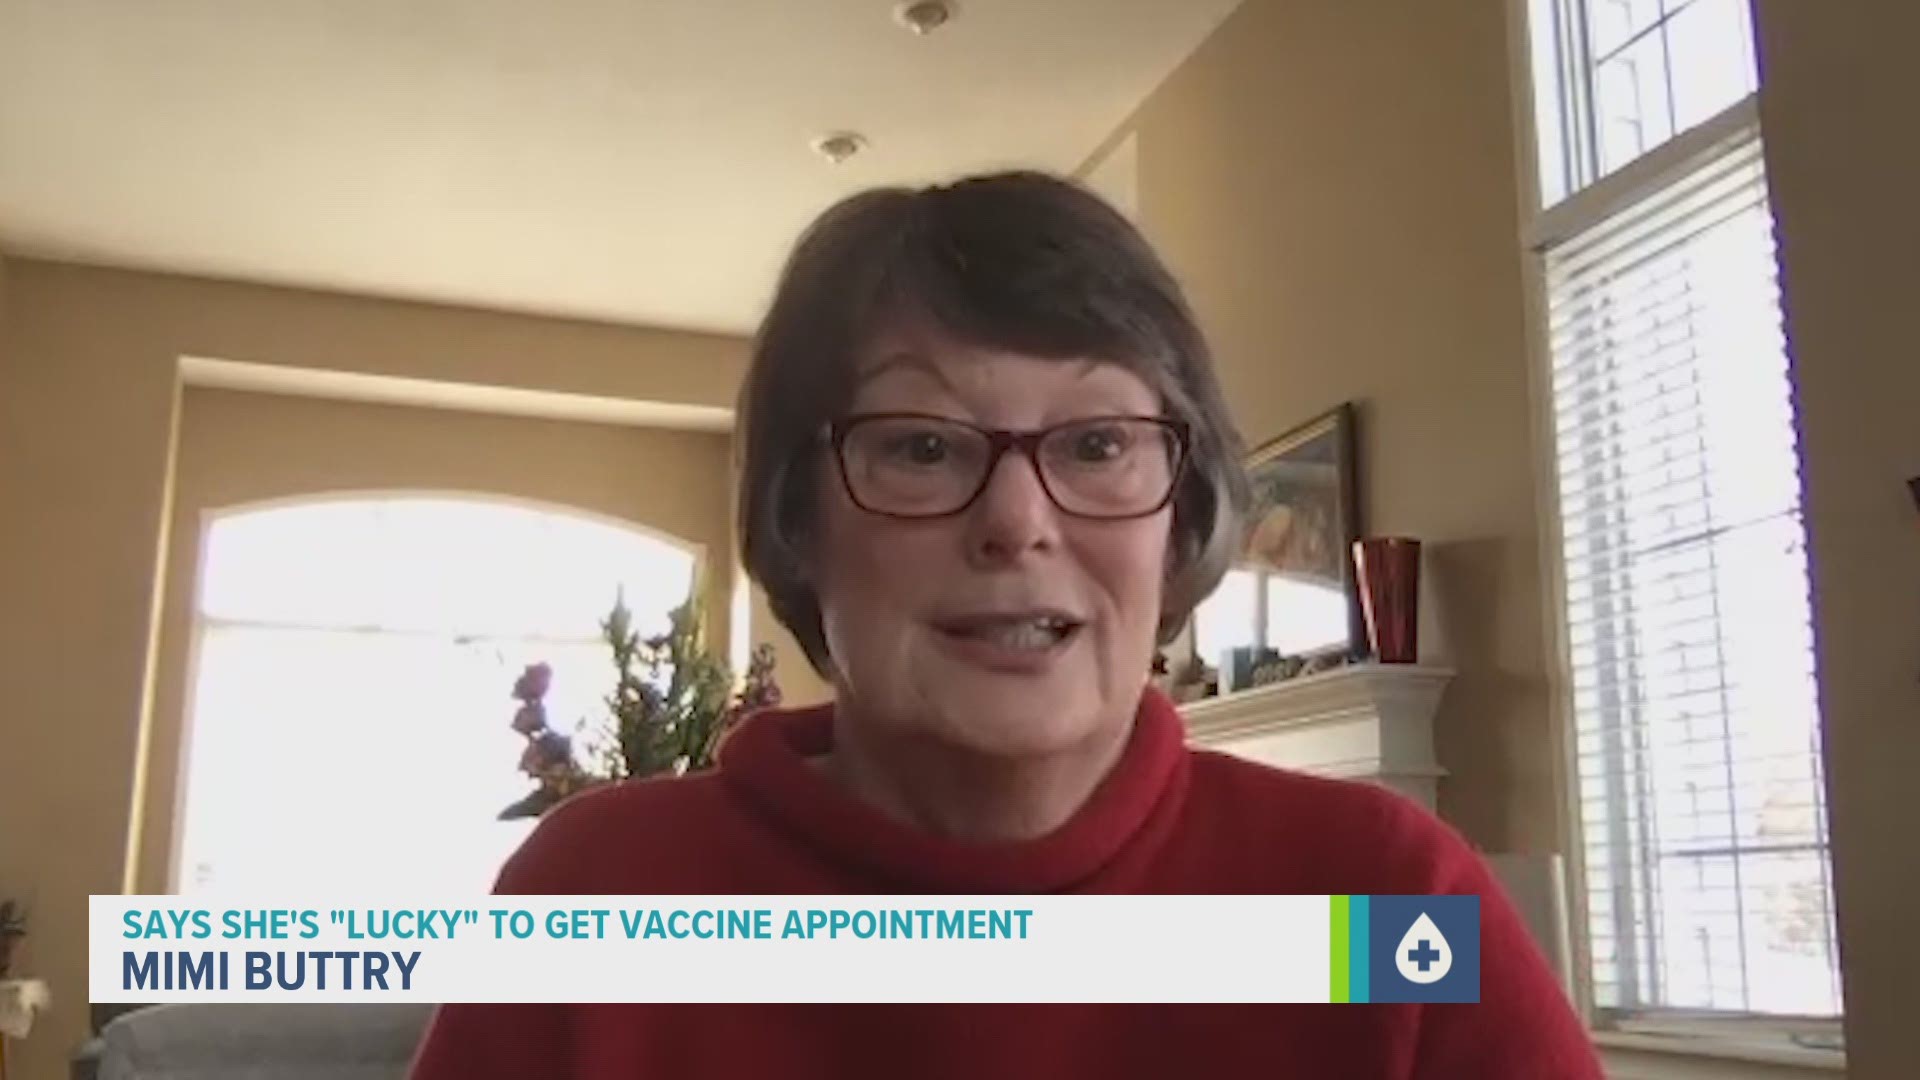 Mimi Buttry, 66, said it took her many calls and web page refreshes to finally schedule her vaccine appointment.